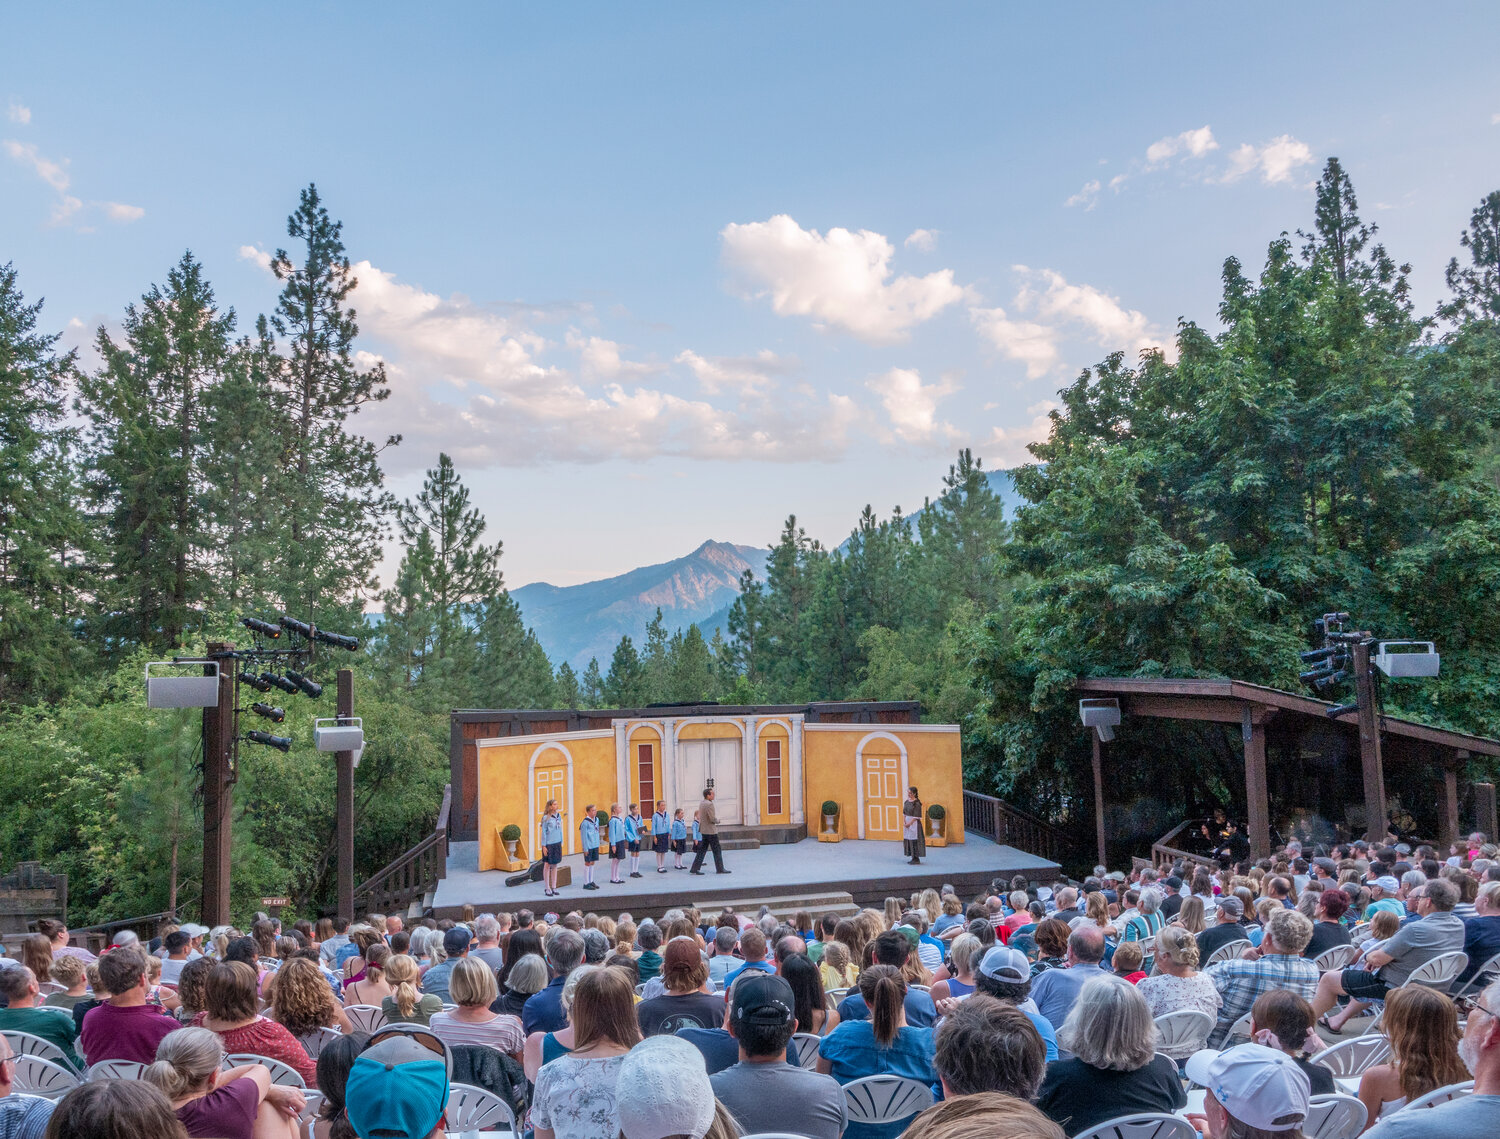 Leavenworth Summer Theater is known for performing “The Sound of Music” against the backdrop of the Cascade Mountains.